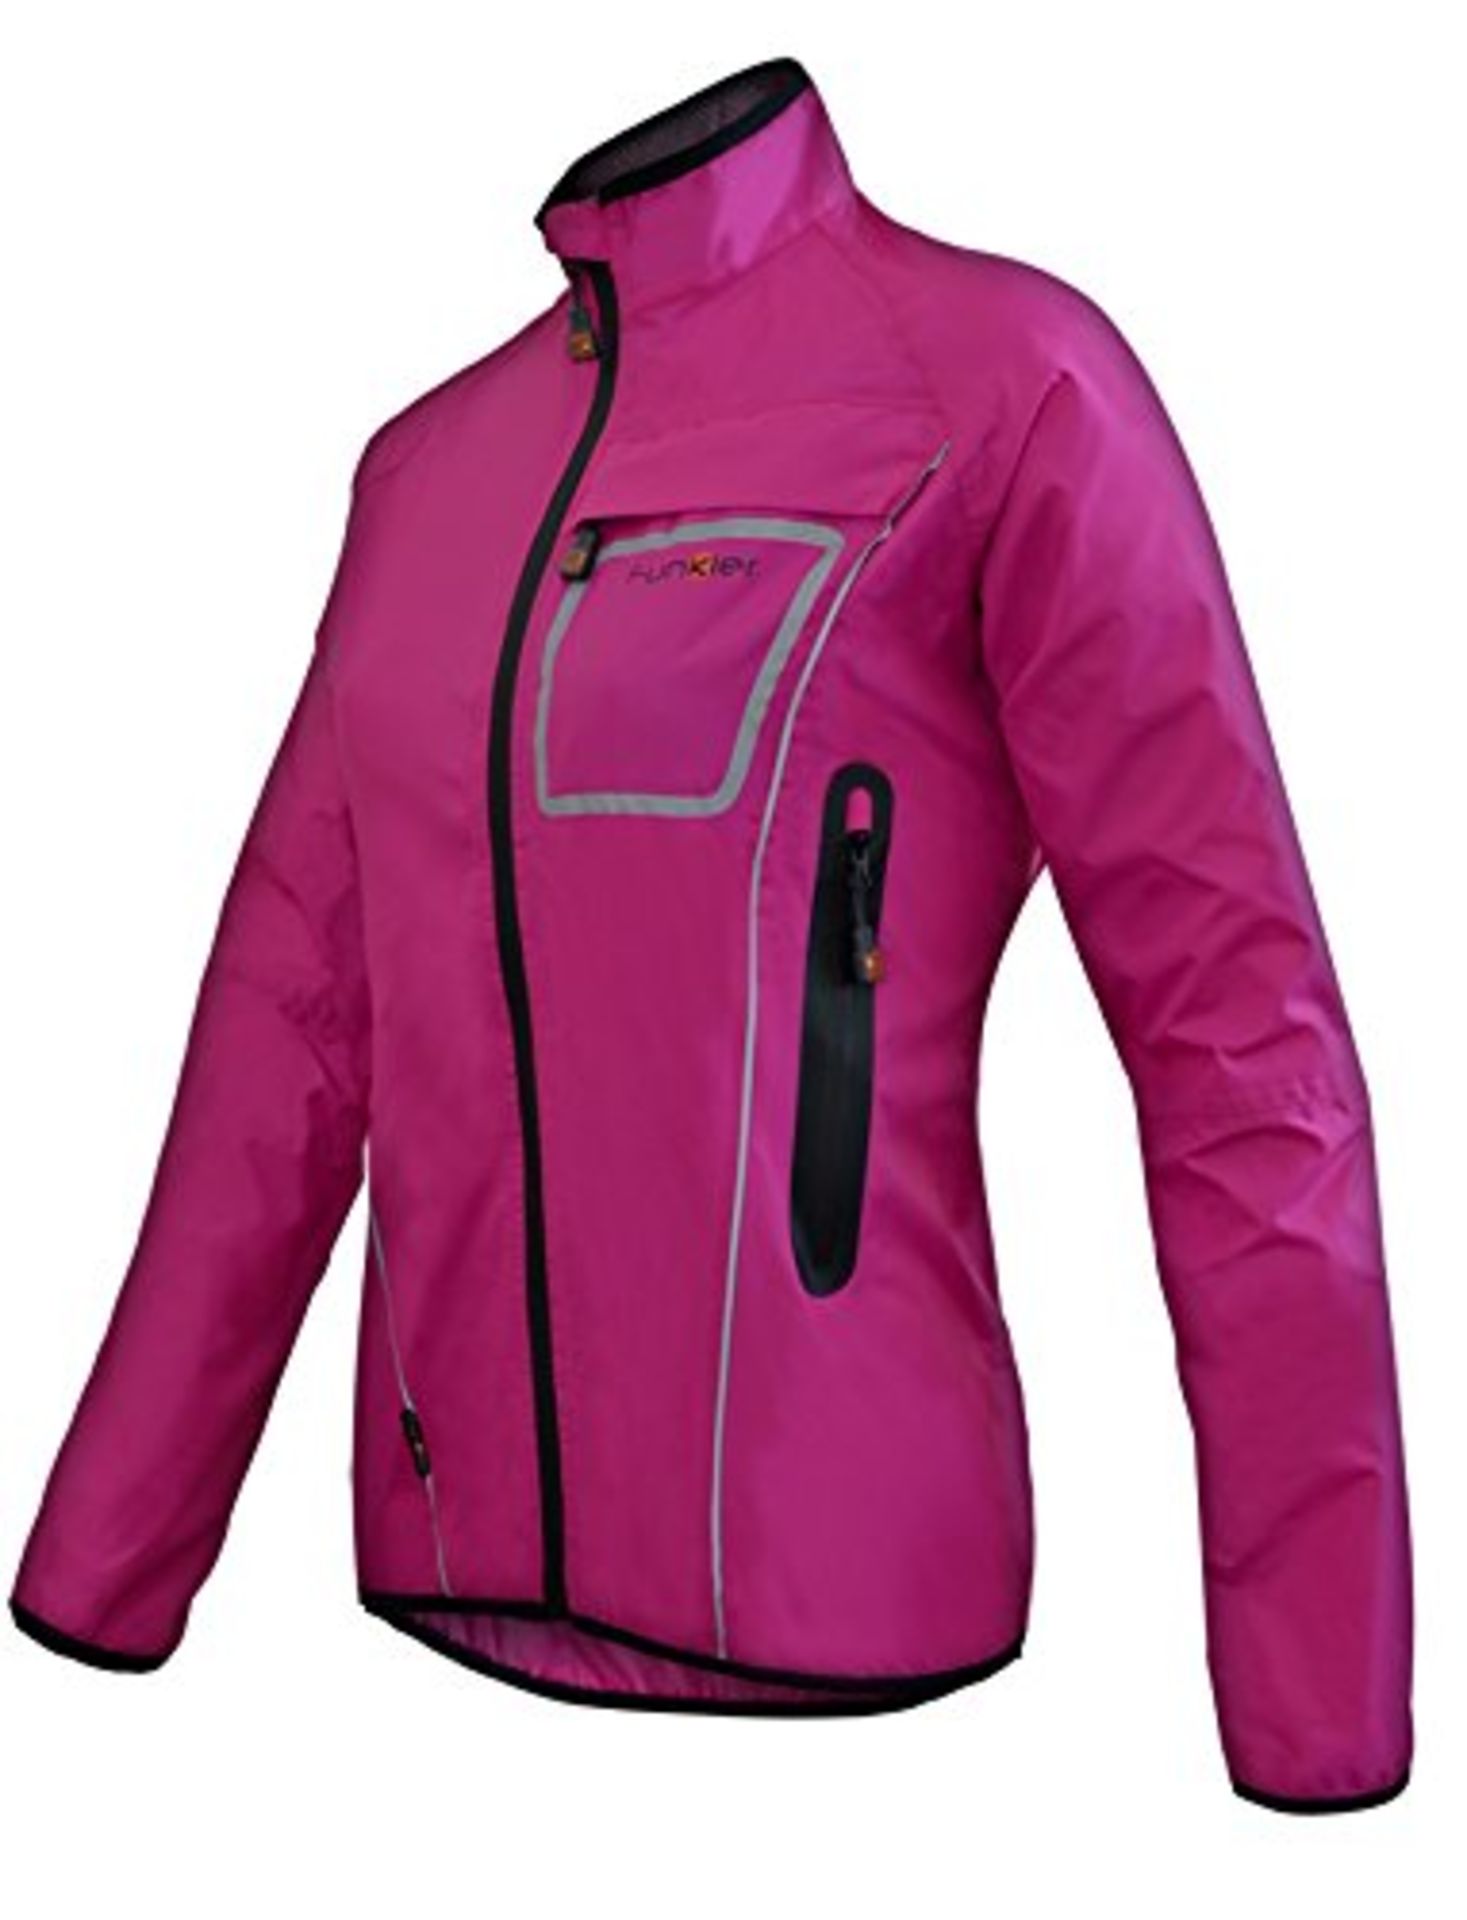 Selection of Funkier Women's Cycling Clothing | Total RRP £515.24 | Various Sizes |See Description f - Image 9 of 12